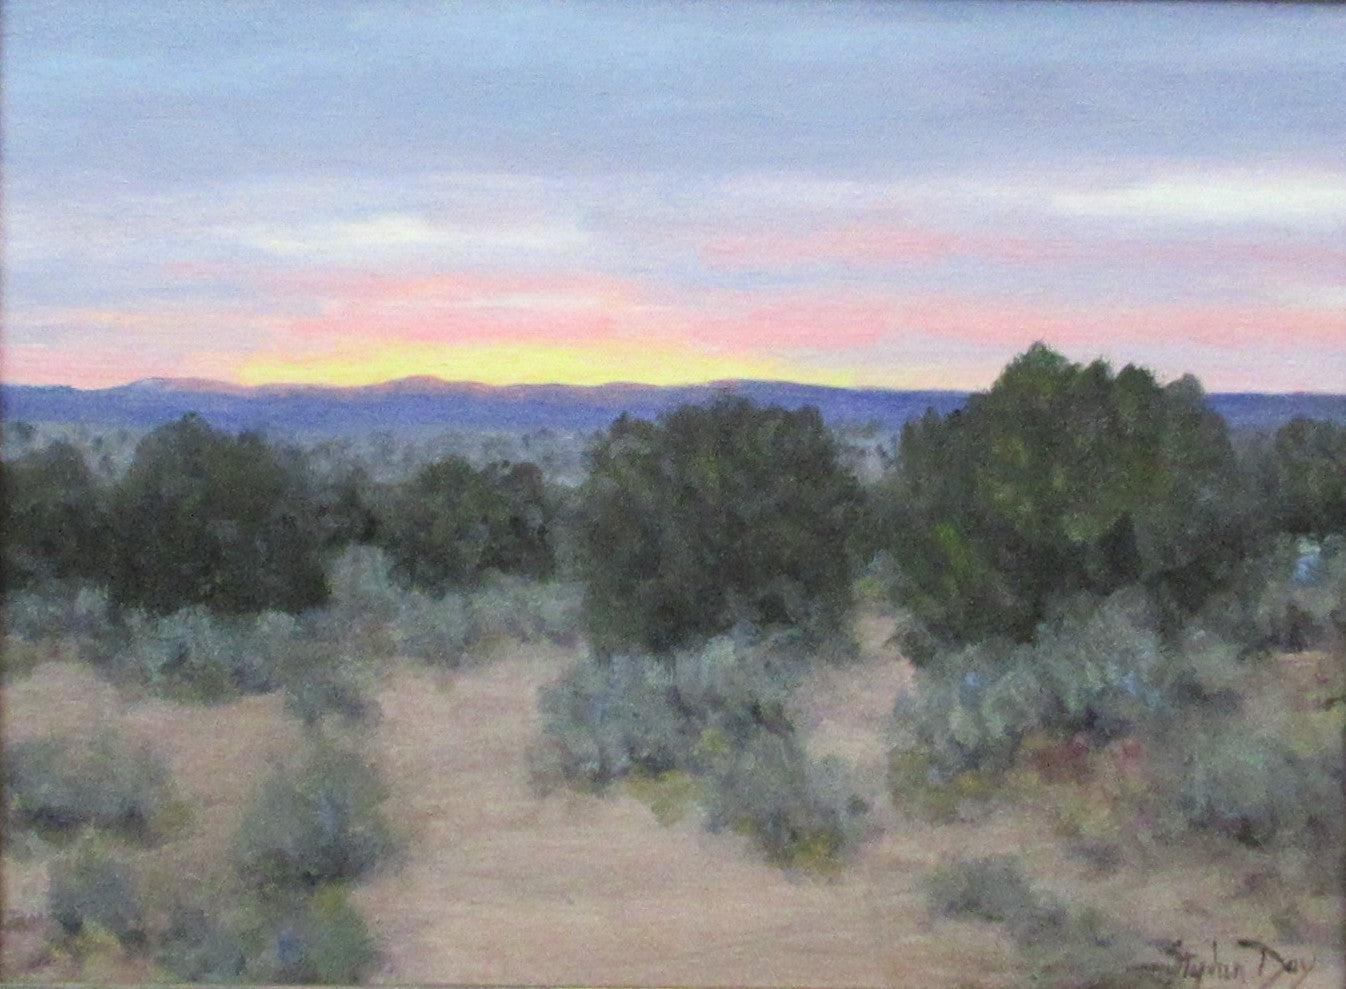 Calm Evening-Painting-Stephen Day-Sorrel Sky Gallery